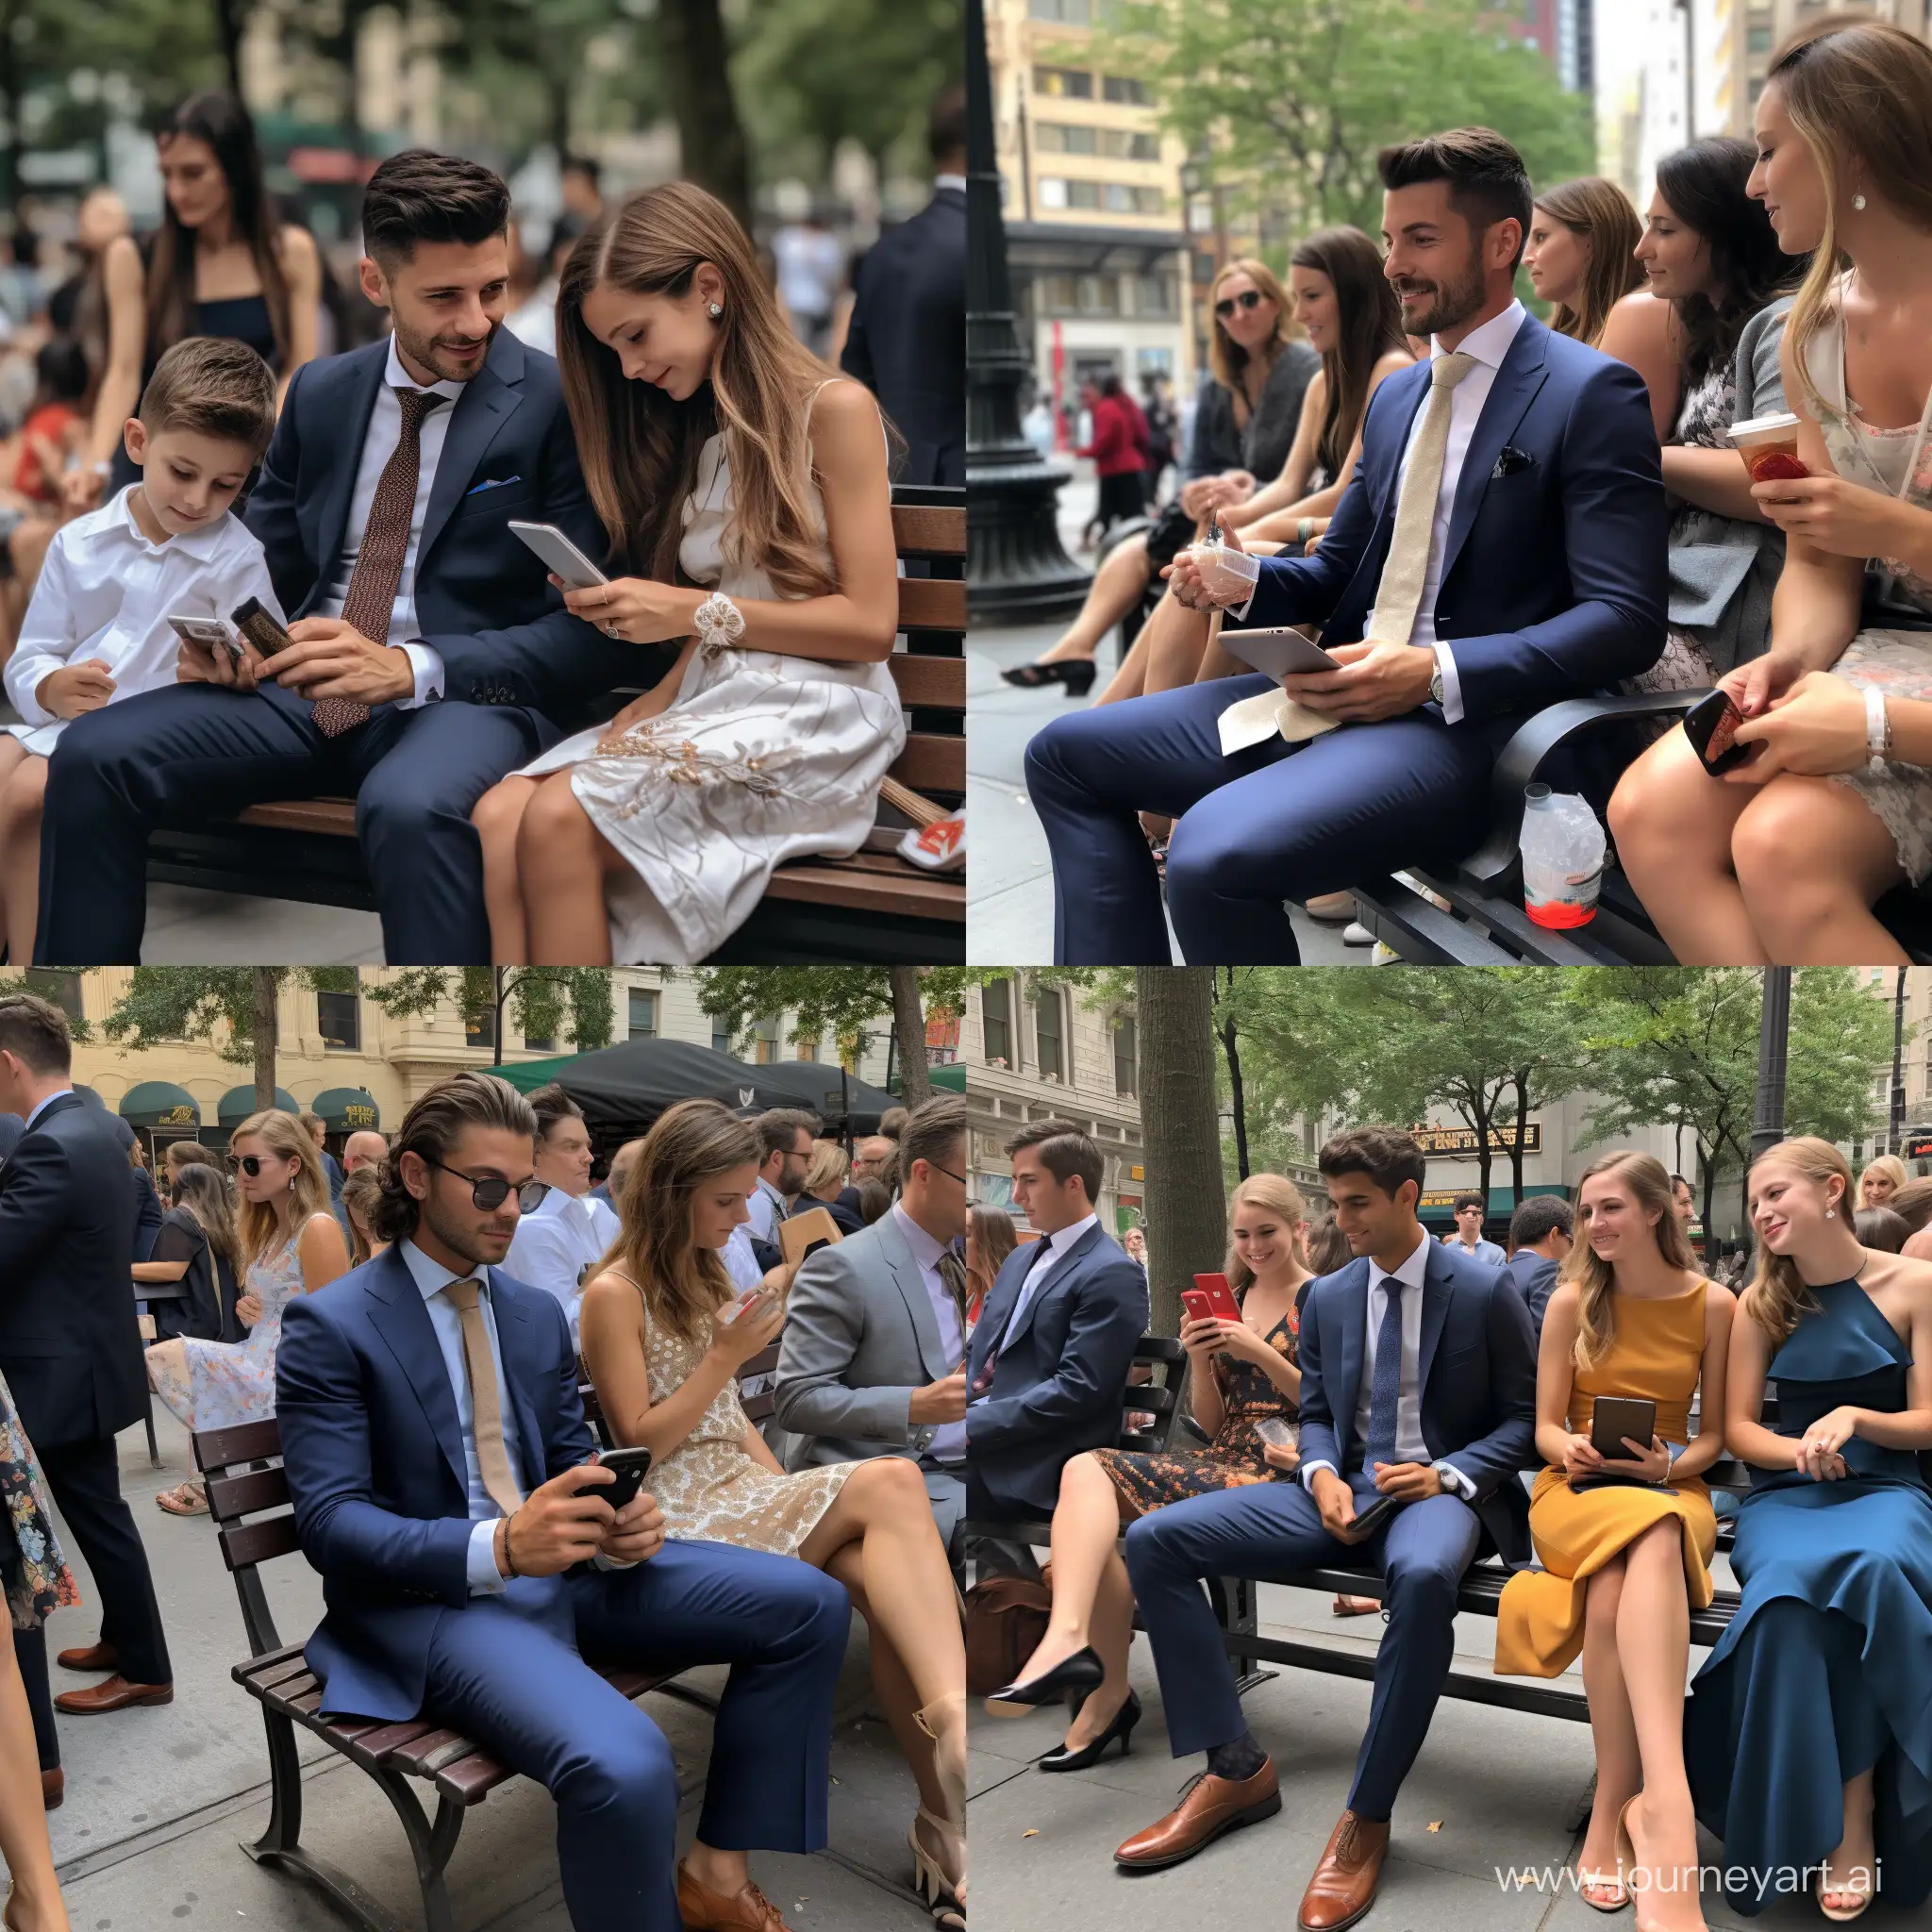 Man-and-Family-Celebrating-Wedding-Bliss-on-New-York-Bench-Candid-2019-Snapshot